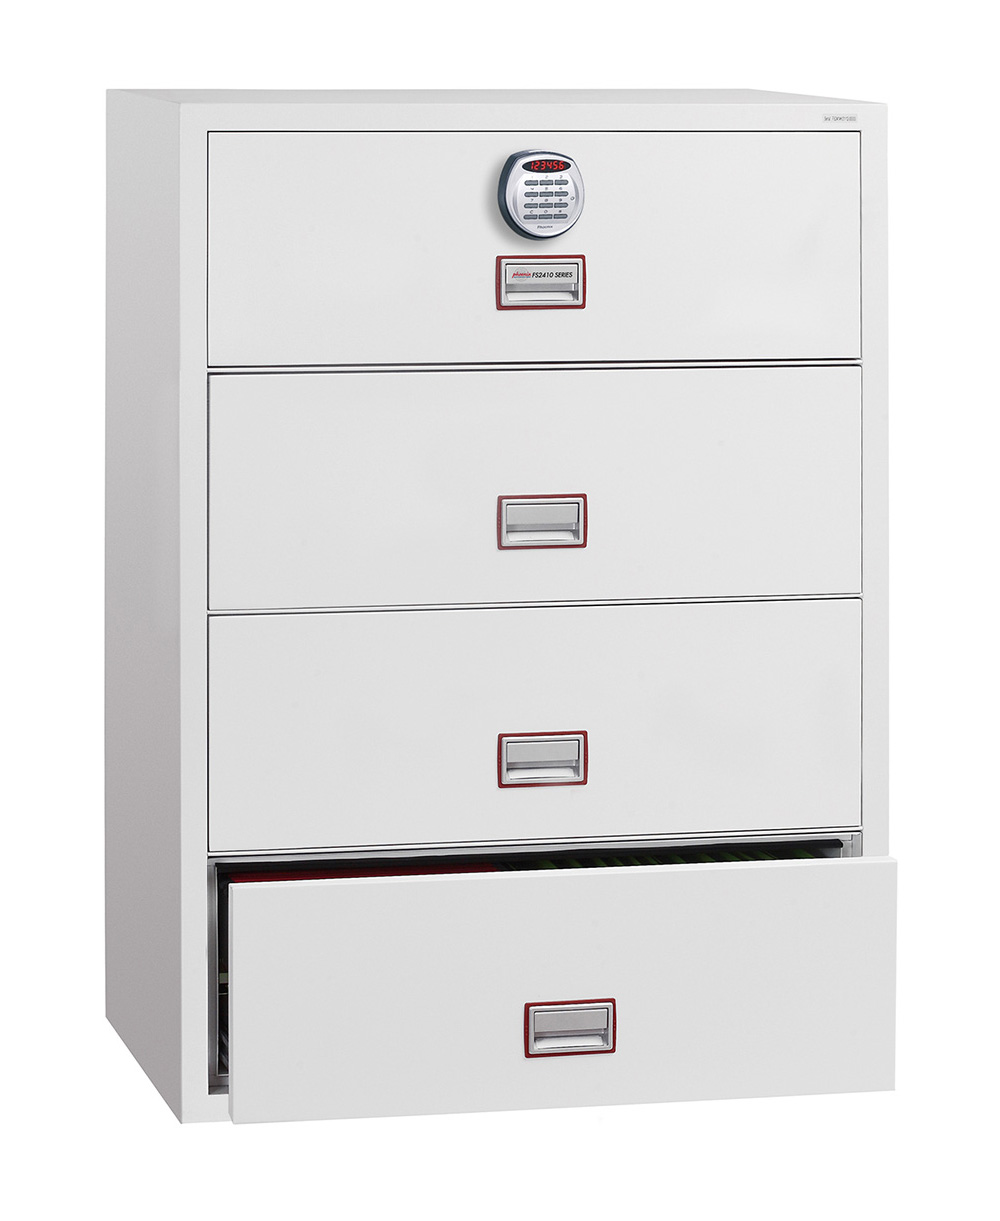 Mobile File Cabinet 3 Fully Open Drawers,JULYFOX 25.6 inch Black Steel Filing Cabinet with Lock 2 Keys Curved Handle Letter Legal A4 Size Fully Assembled Except Wheels 330 lb Heavy Duty 